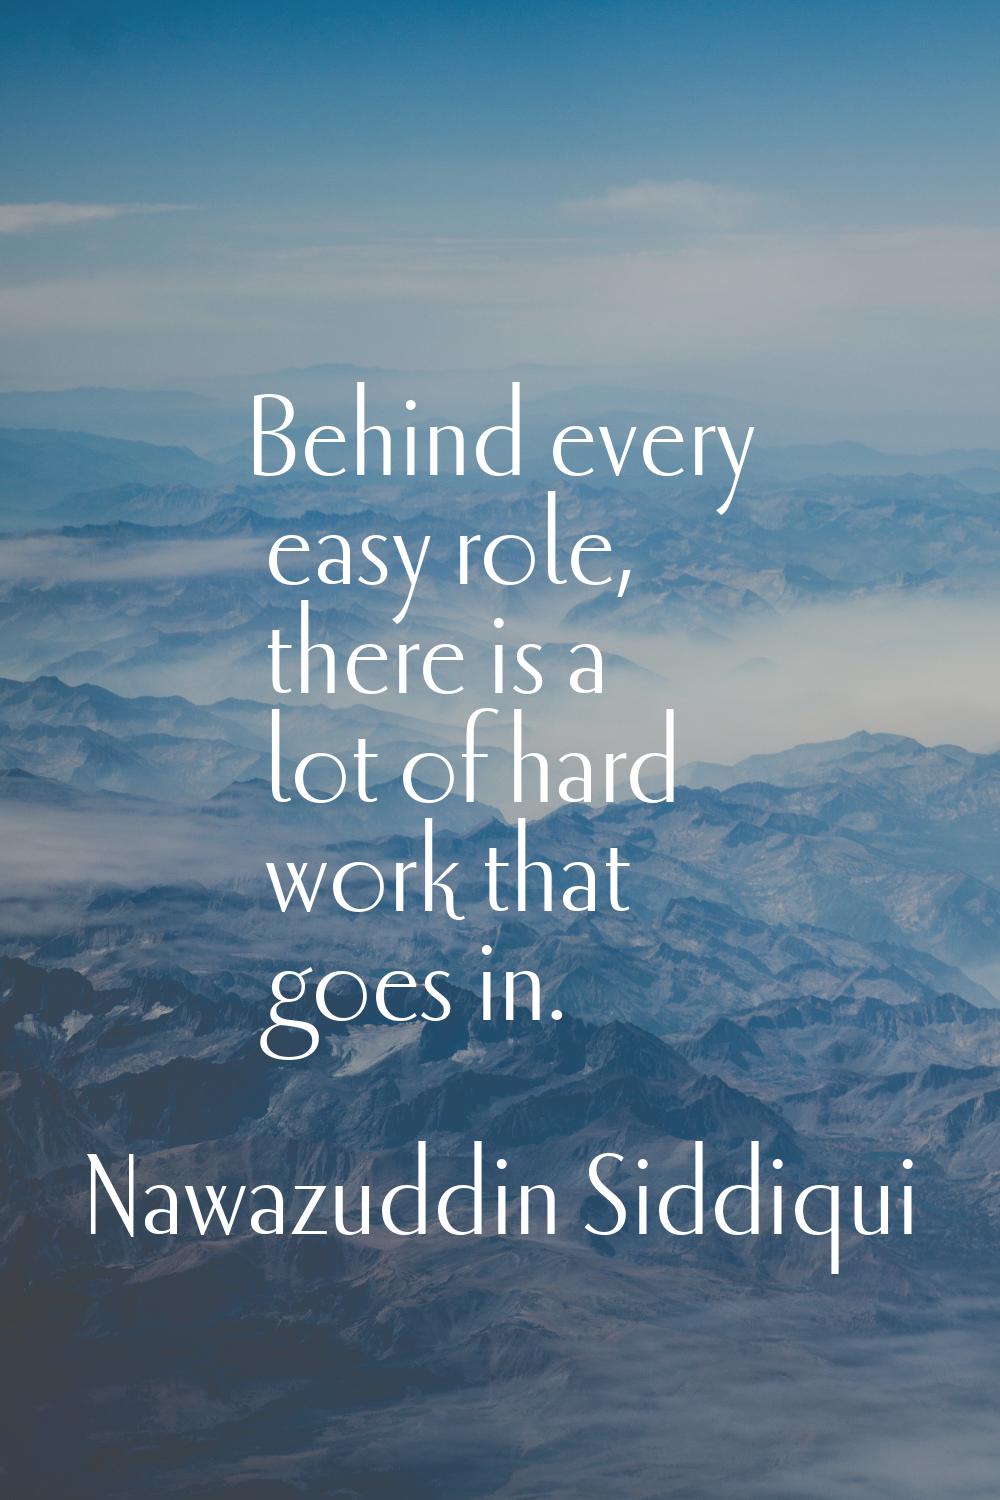 Behind every easy role, there is a lot of hard work that goes in.